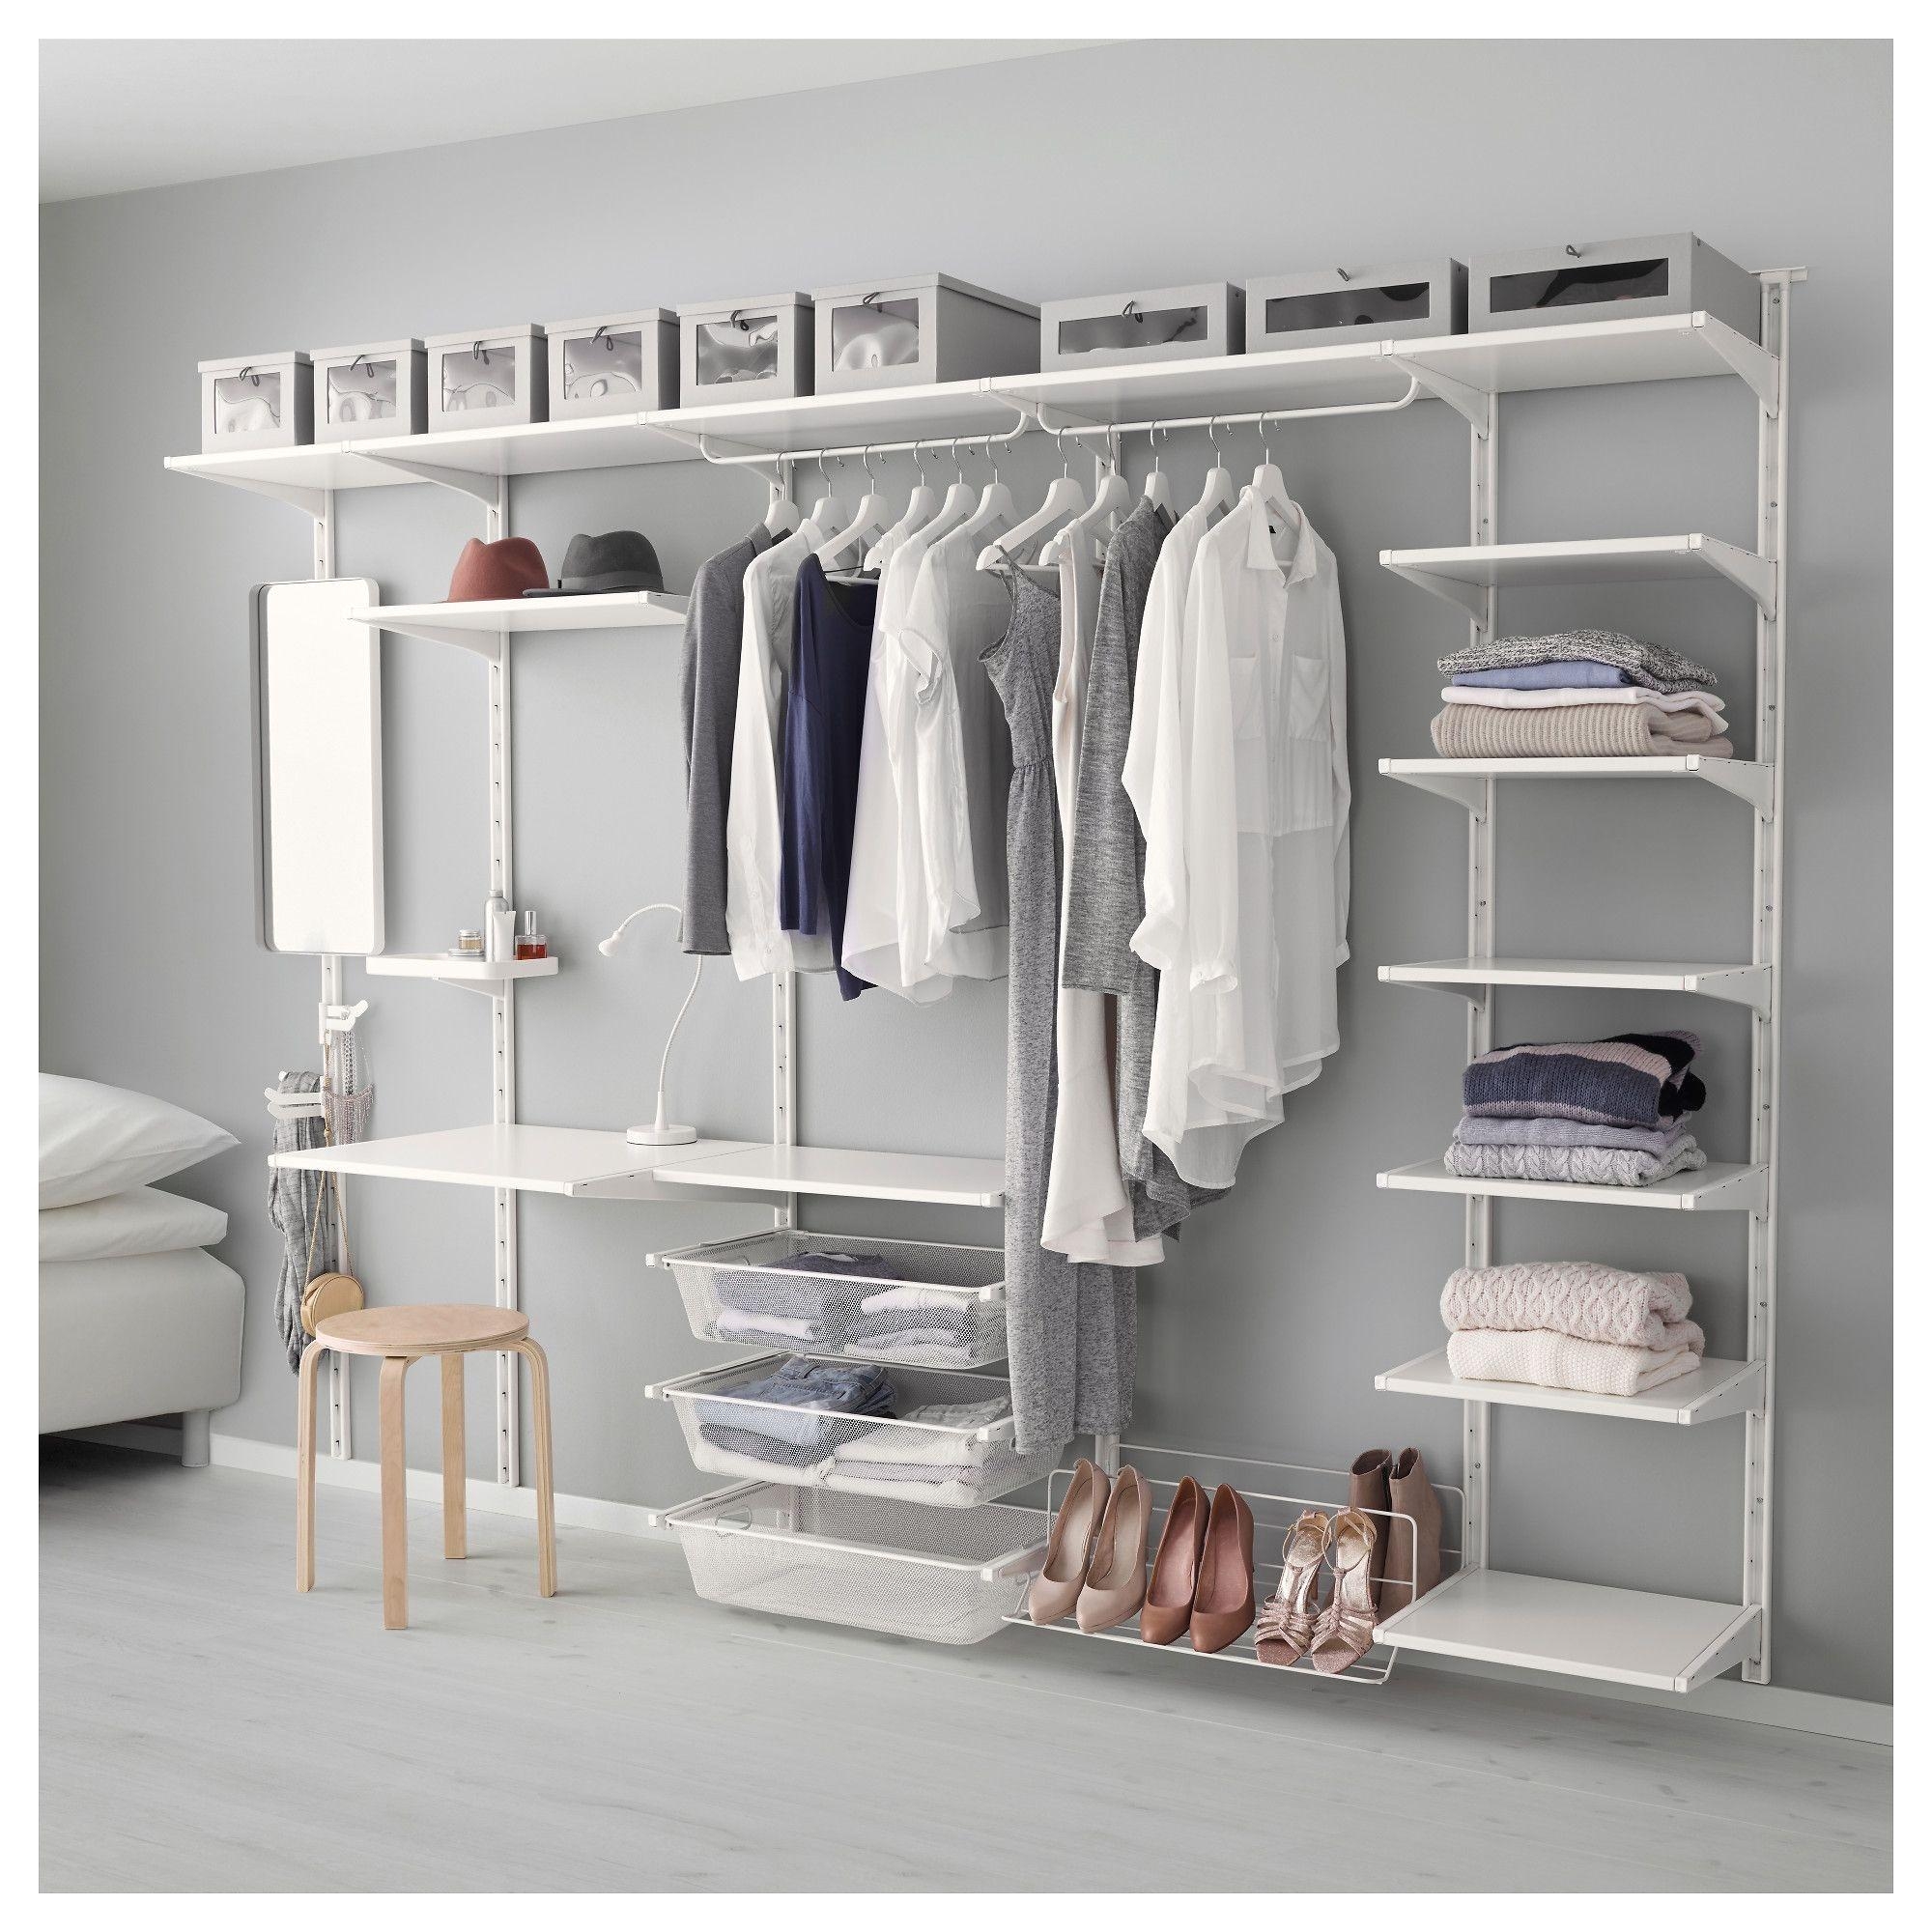 full size of home design closet organizers at lowes fresh wardrobe storage closet portable closete large size of home design closet organizers at lowes